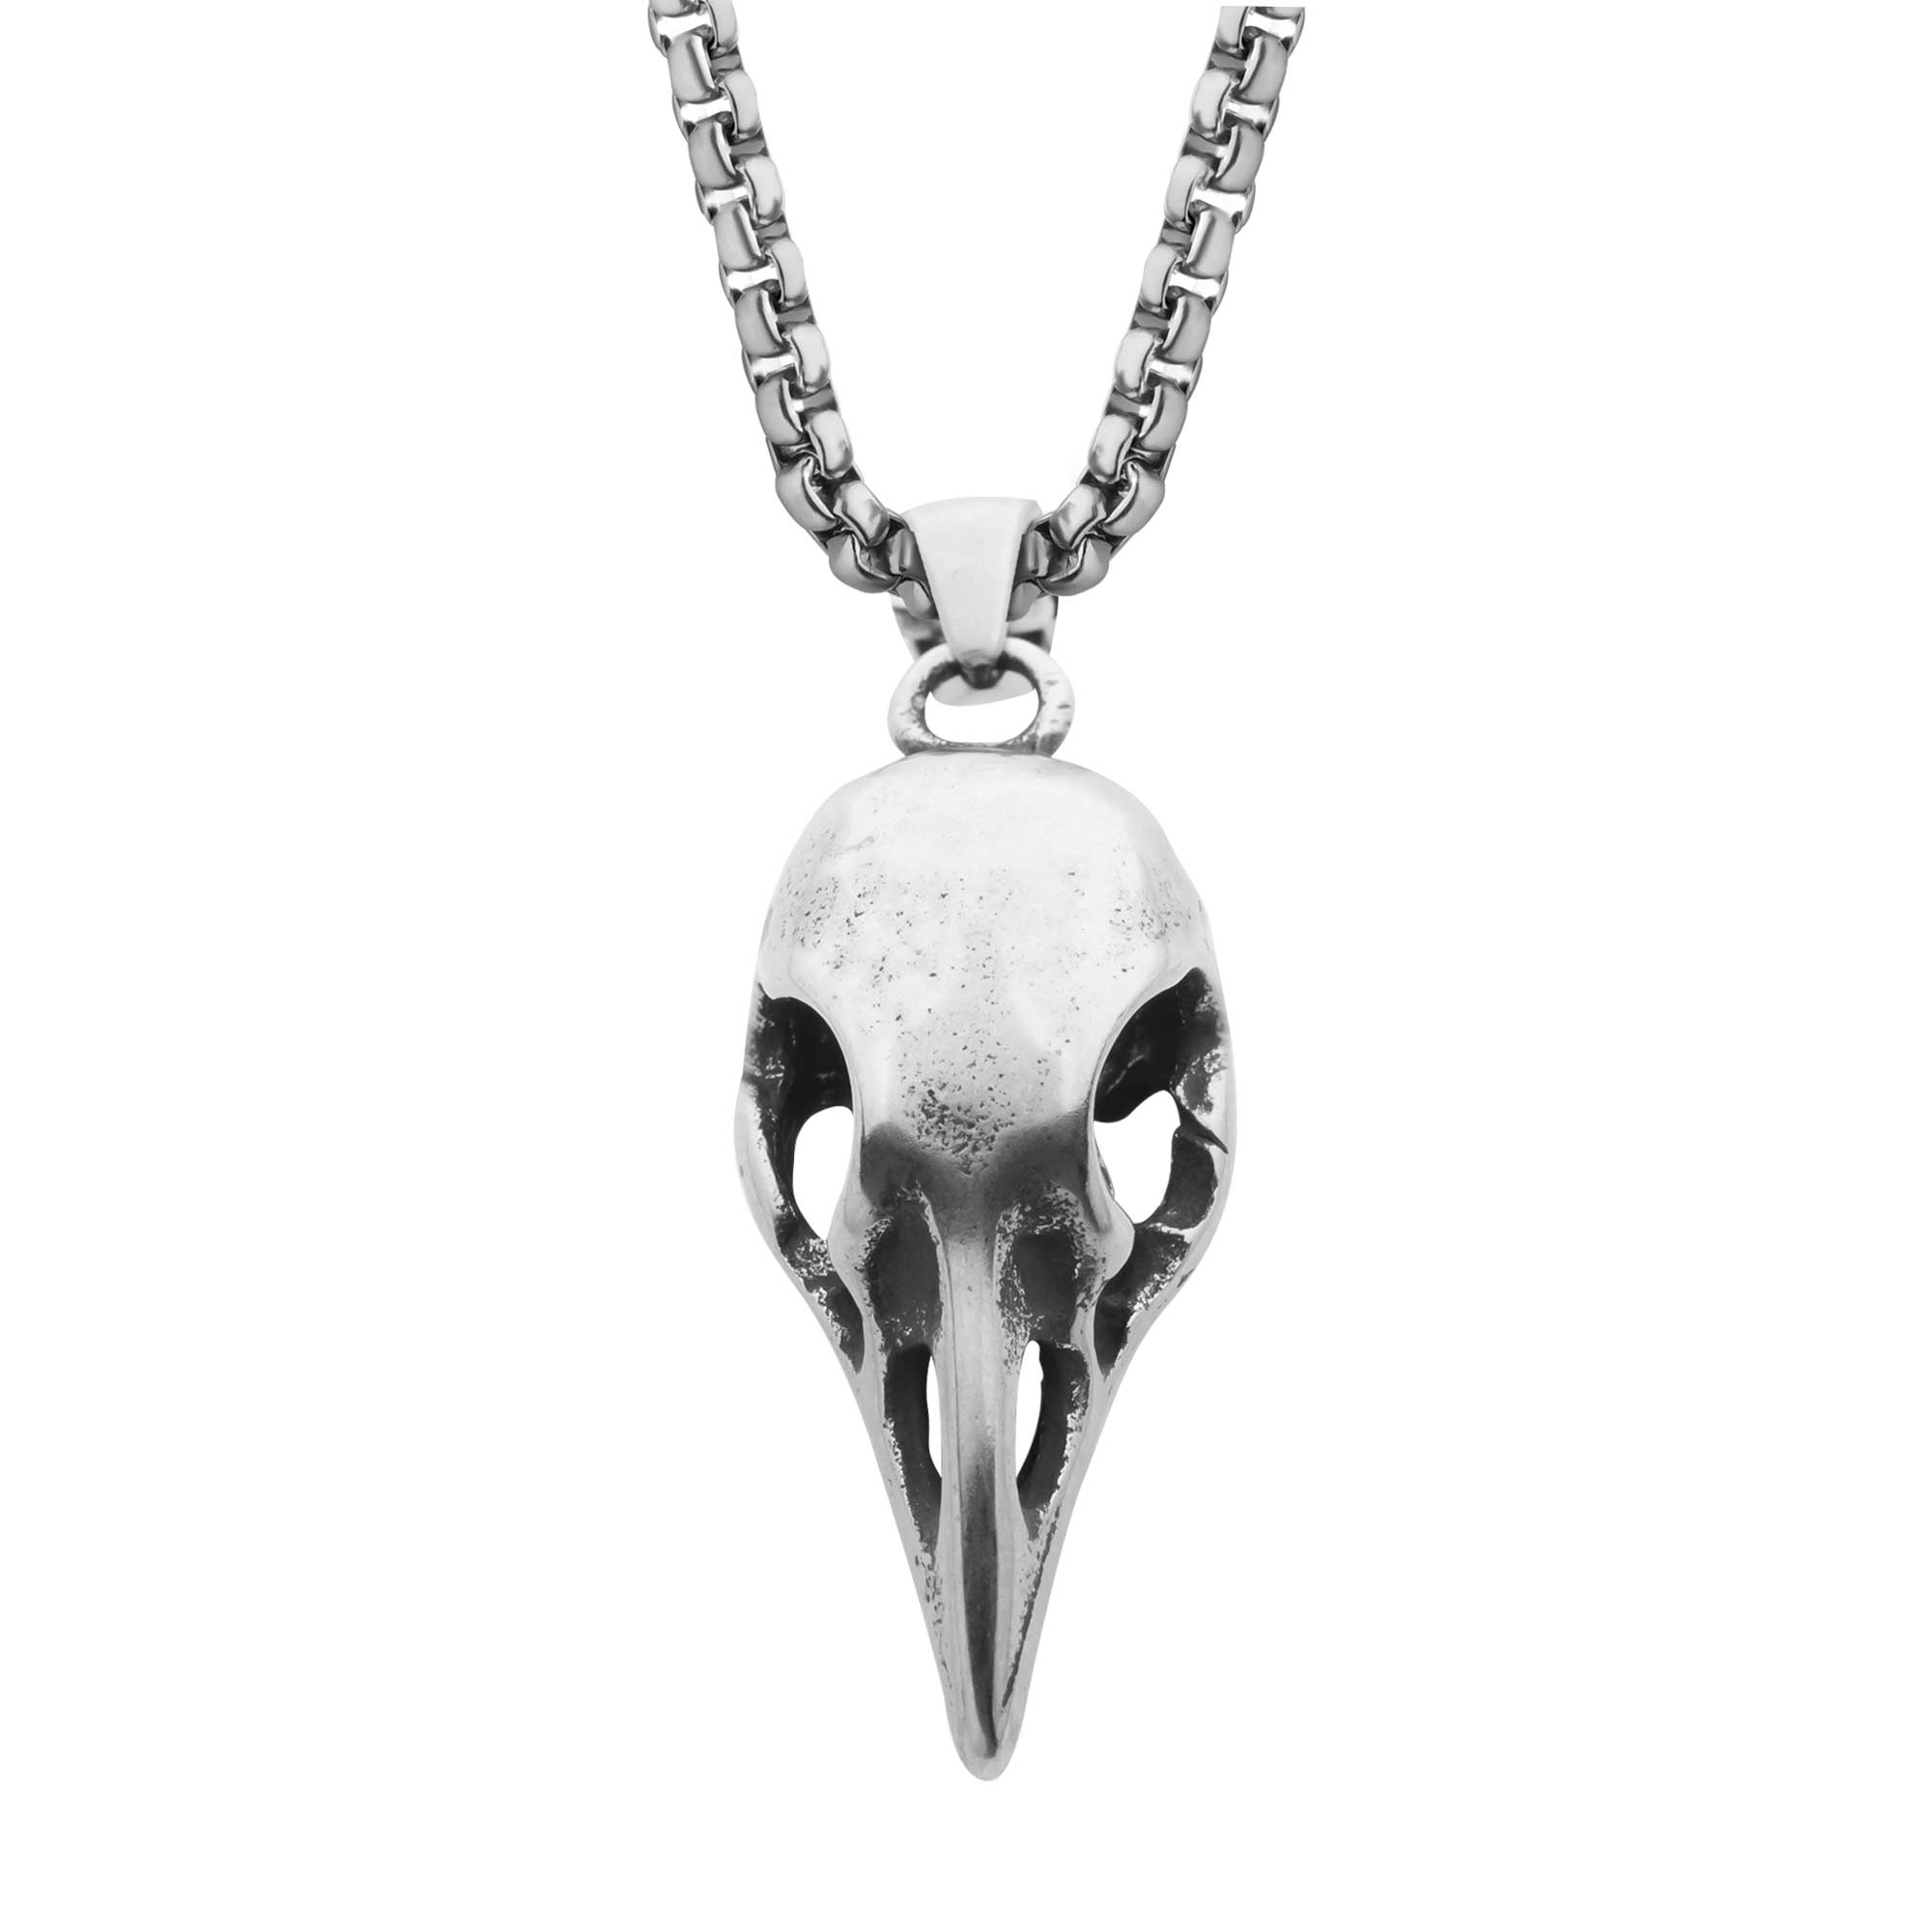 Distressed Matte Steel Crow Skull Pendant with Chain Thurber's Fine Jewelry Wadsworth, OH